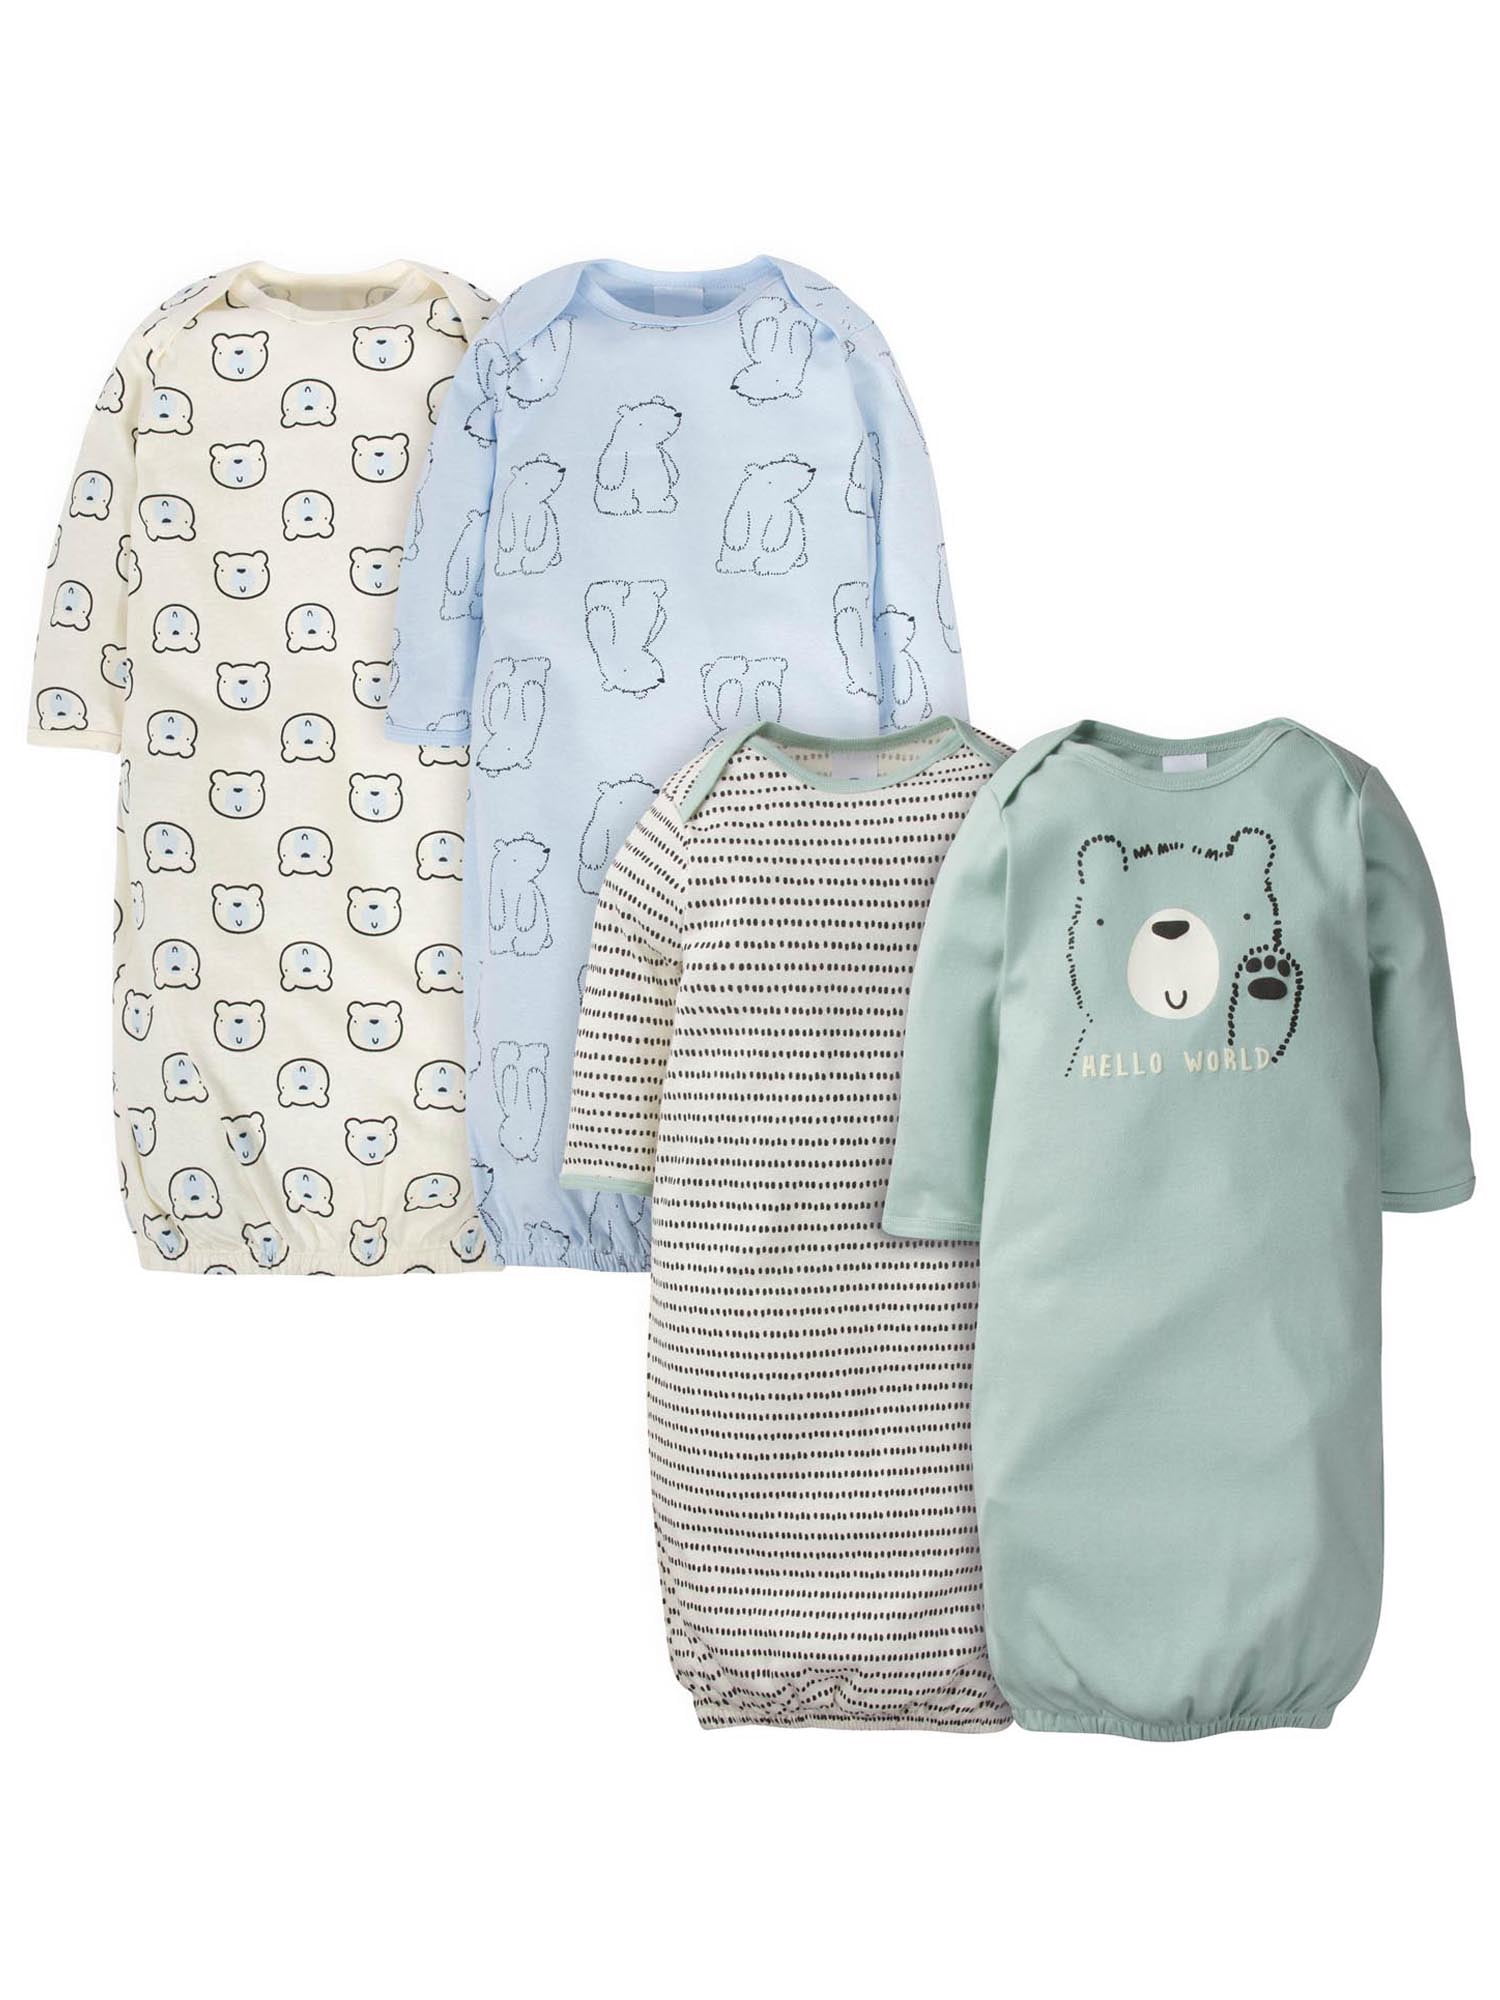 Newborn Knotted Nightgown Long Sleeve with Matching Hat Set 3 Pack, Cotton  Baby Sleeper Gowns Sleeping Bags Home Outfits Set with Mitten Cuffs for Boy